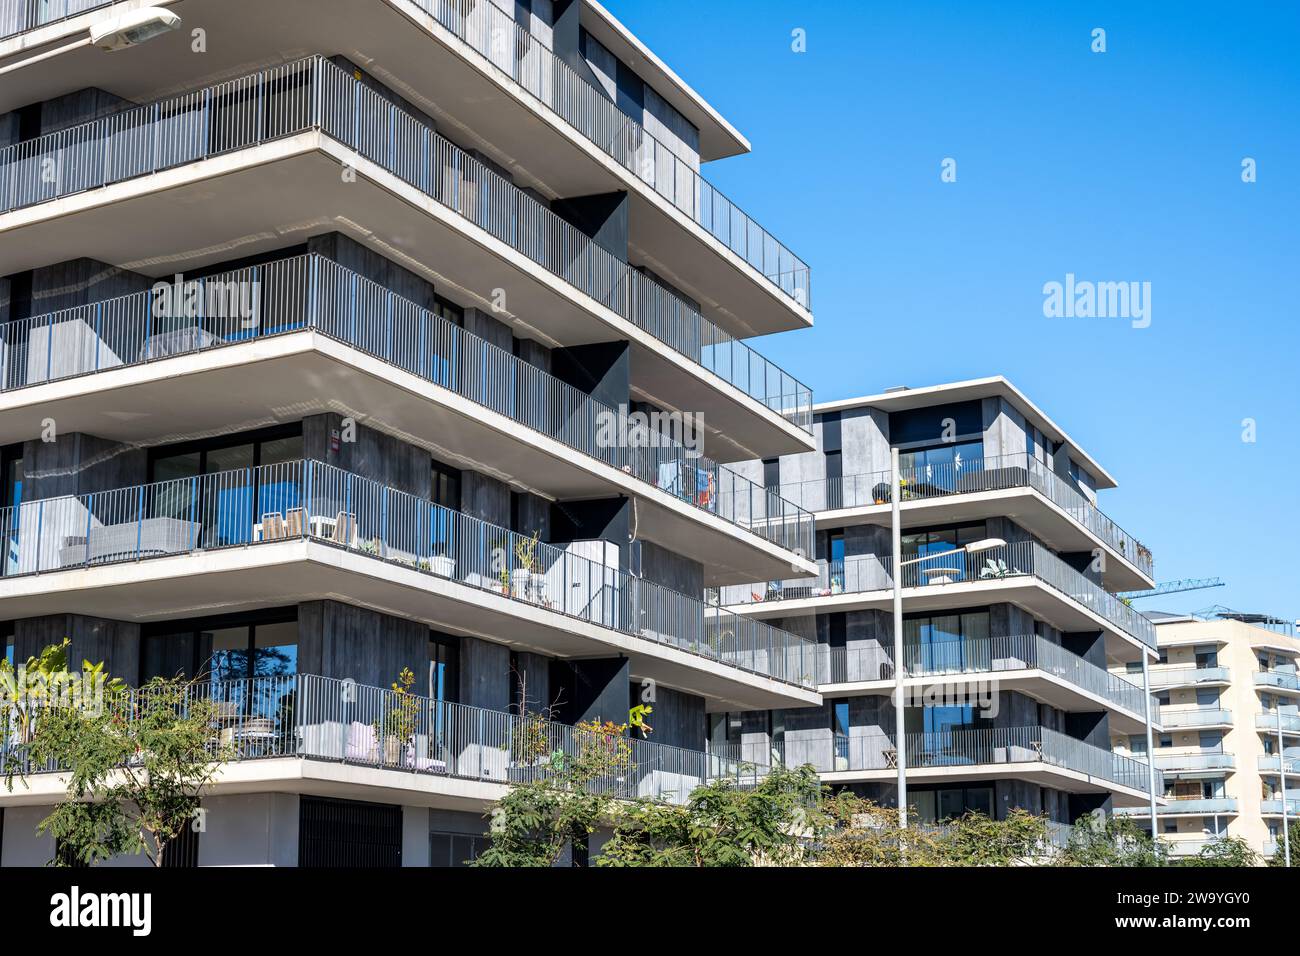 New gray apartment building seen in Barcelona, Spain Stock Photo